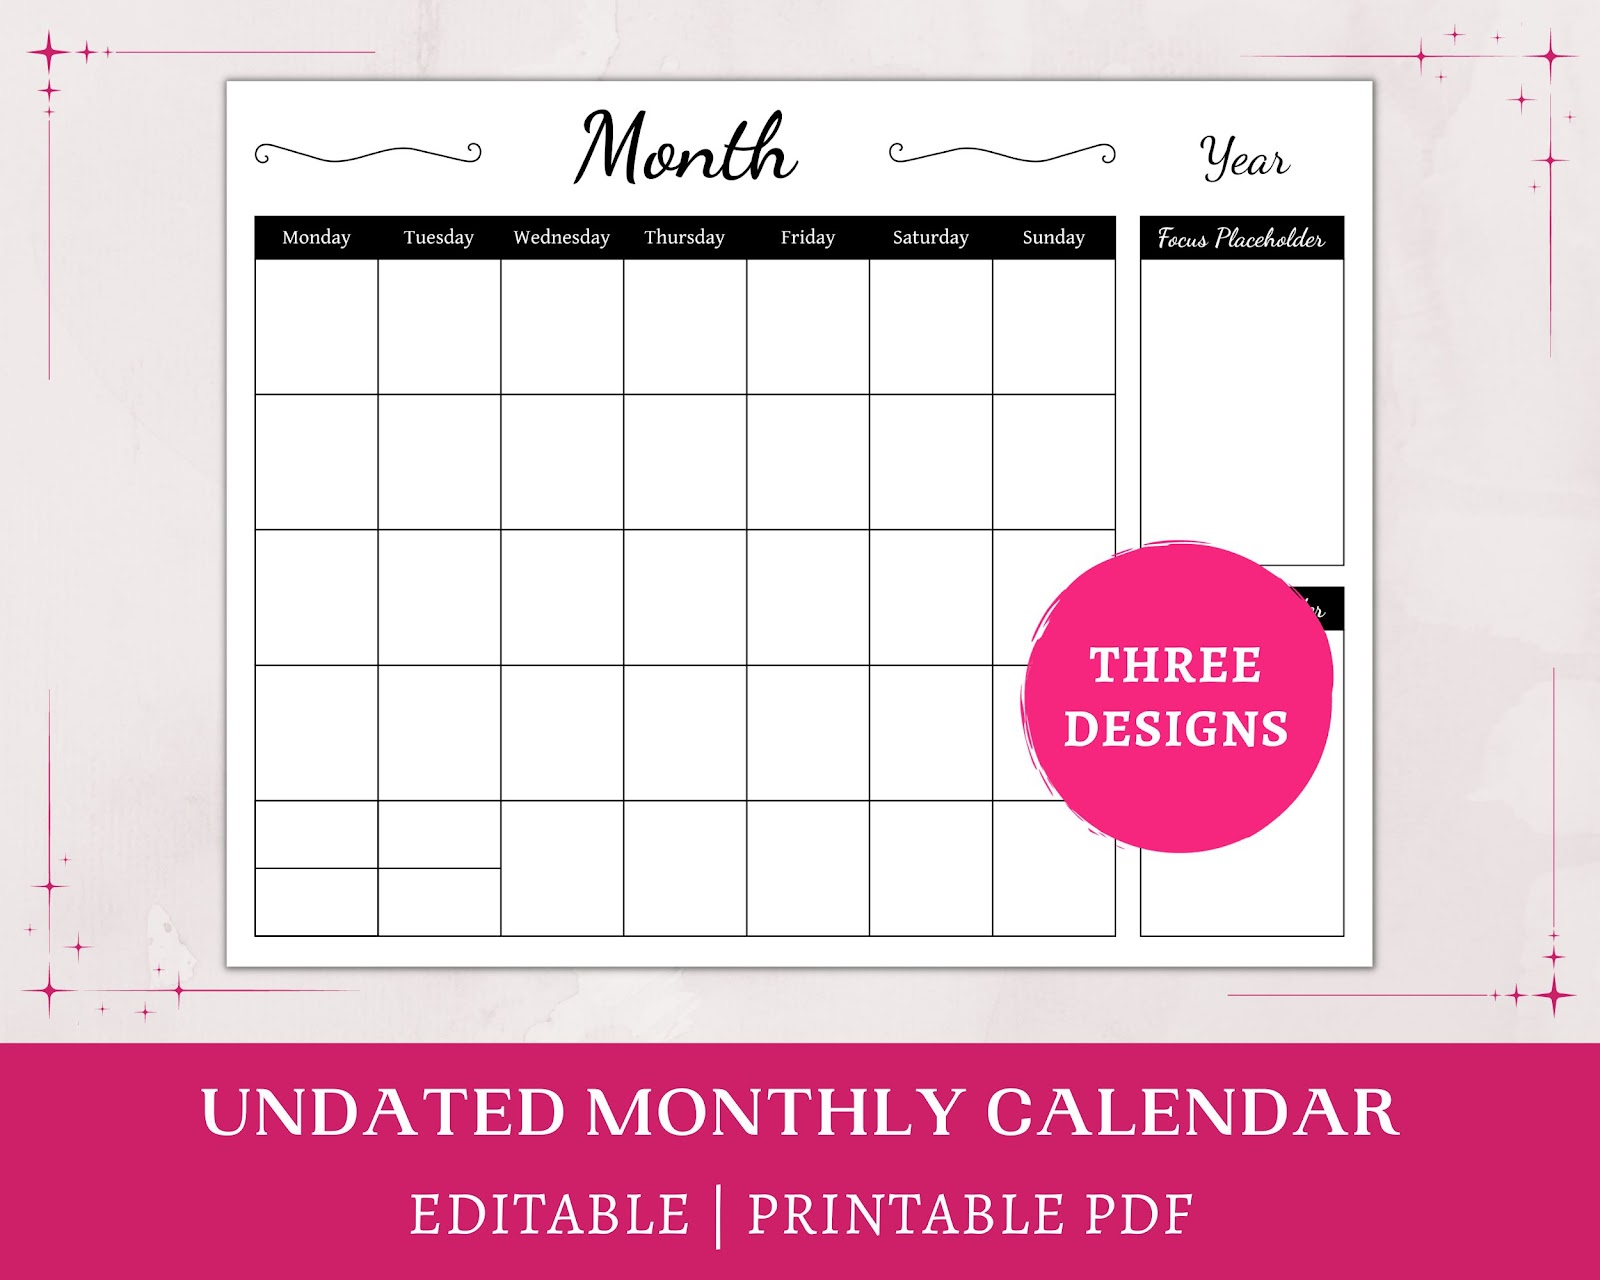 An undated monthly calendar with a minimalist black-and-white design.